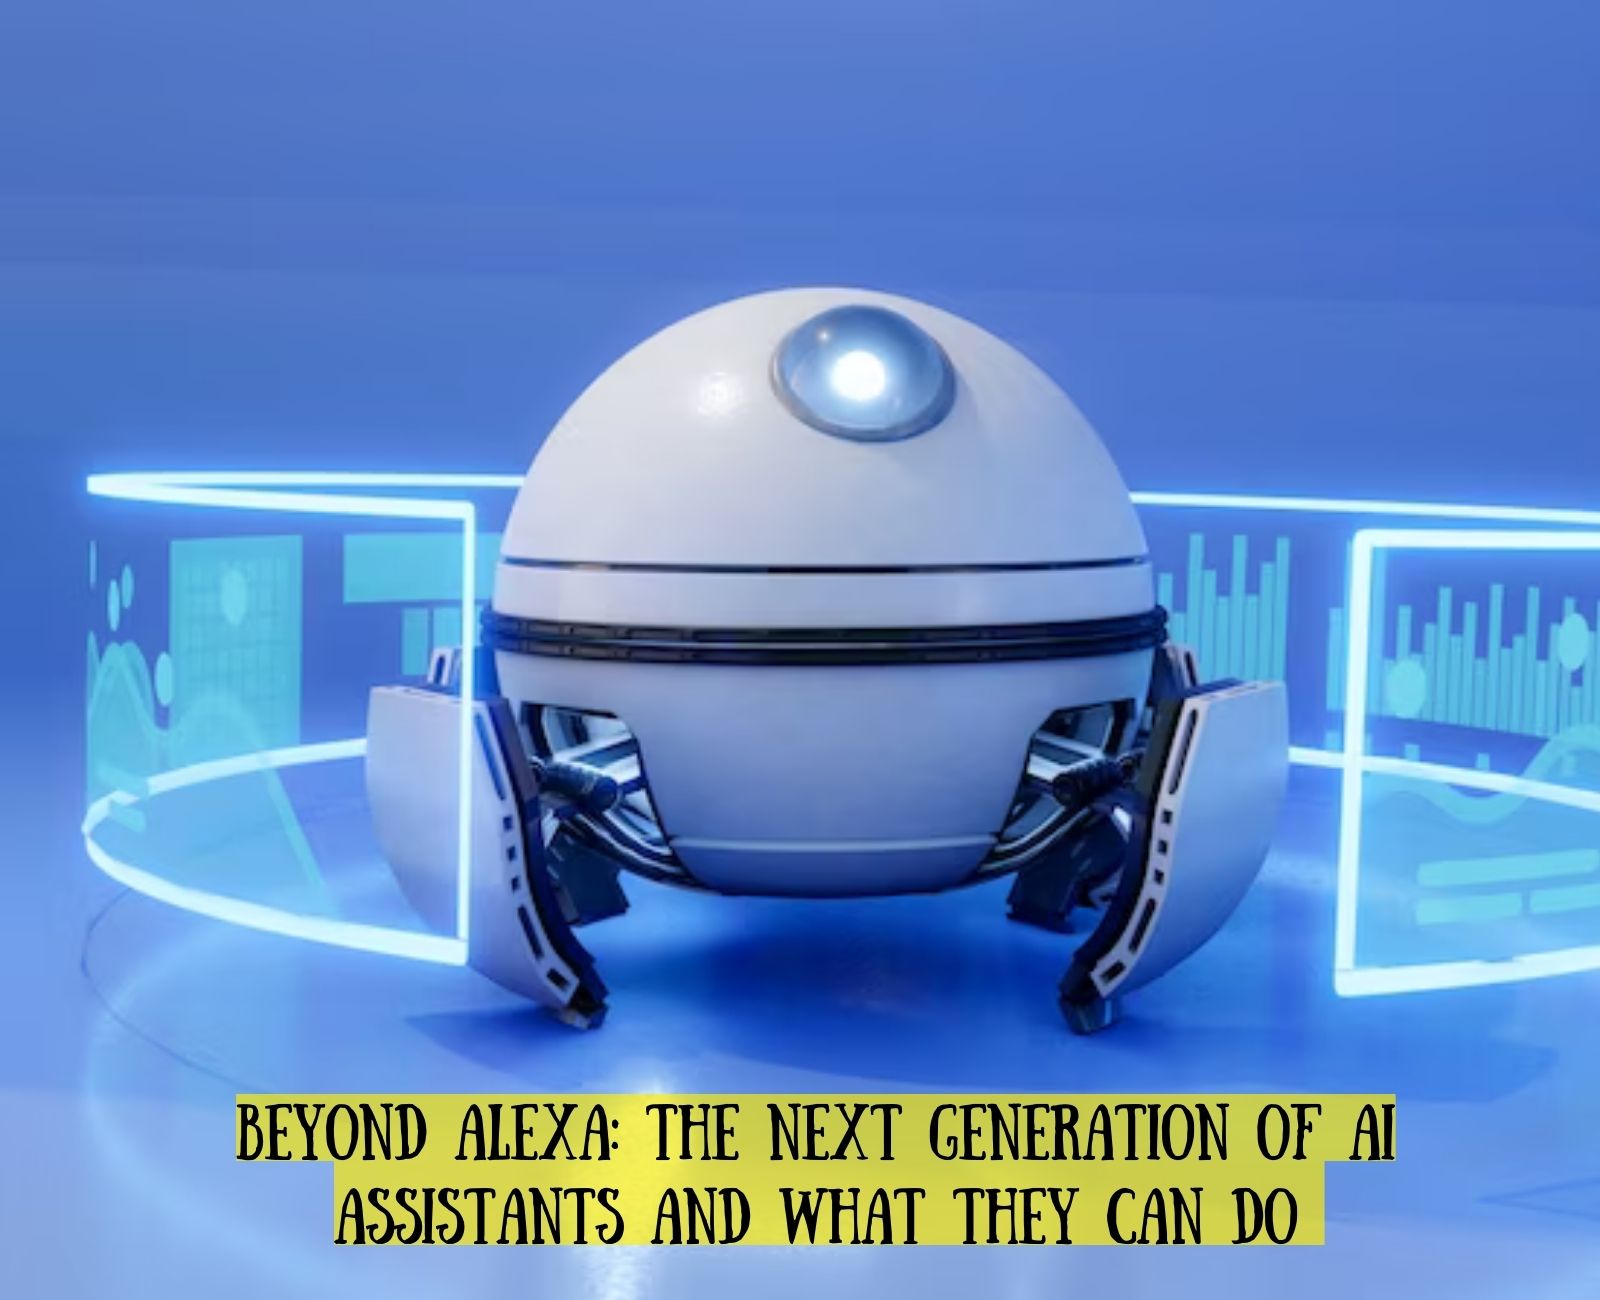 Beyond Alexa: The Next Generation of AI Assistants and What They Can Do